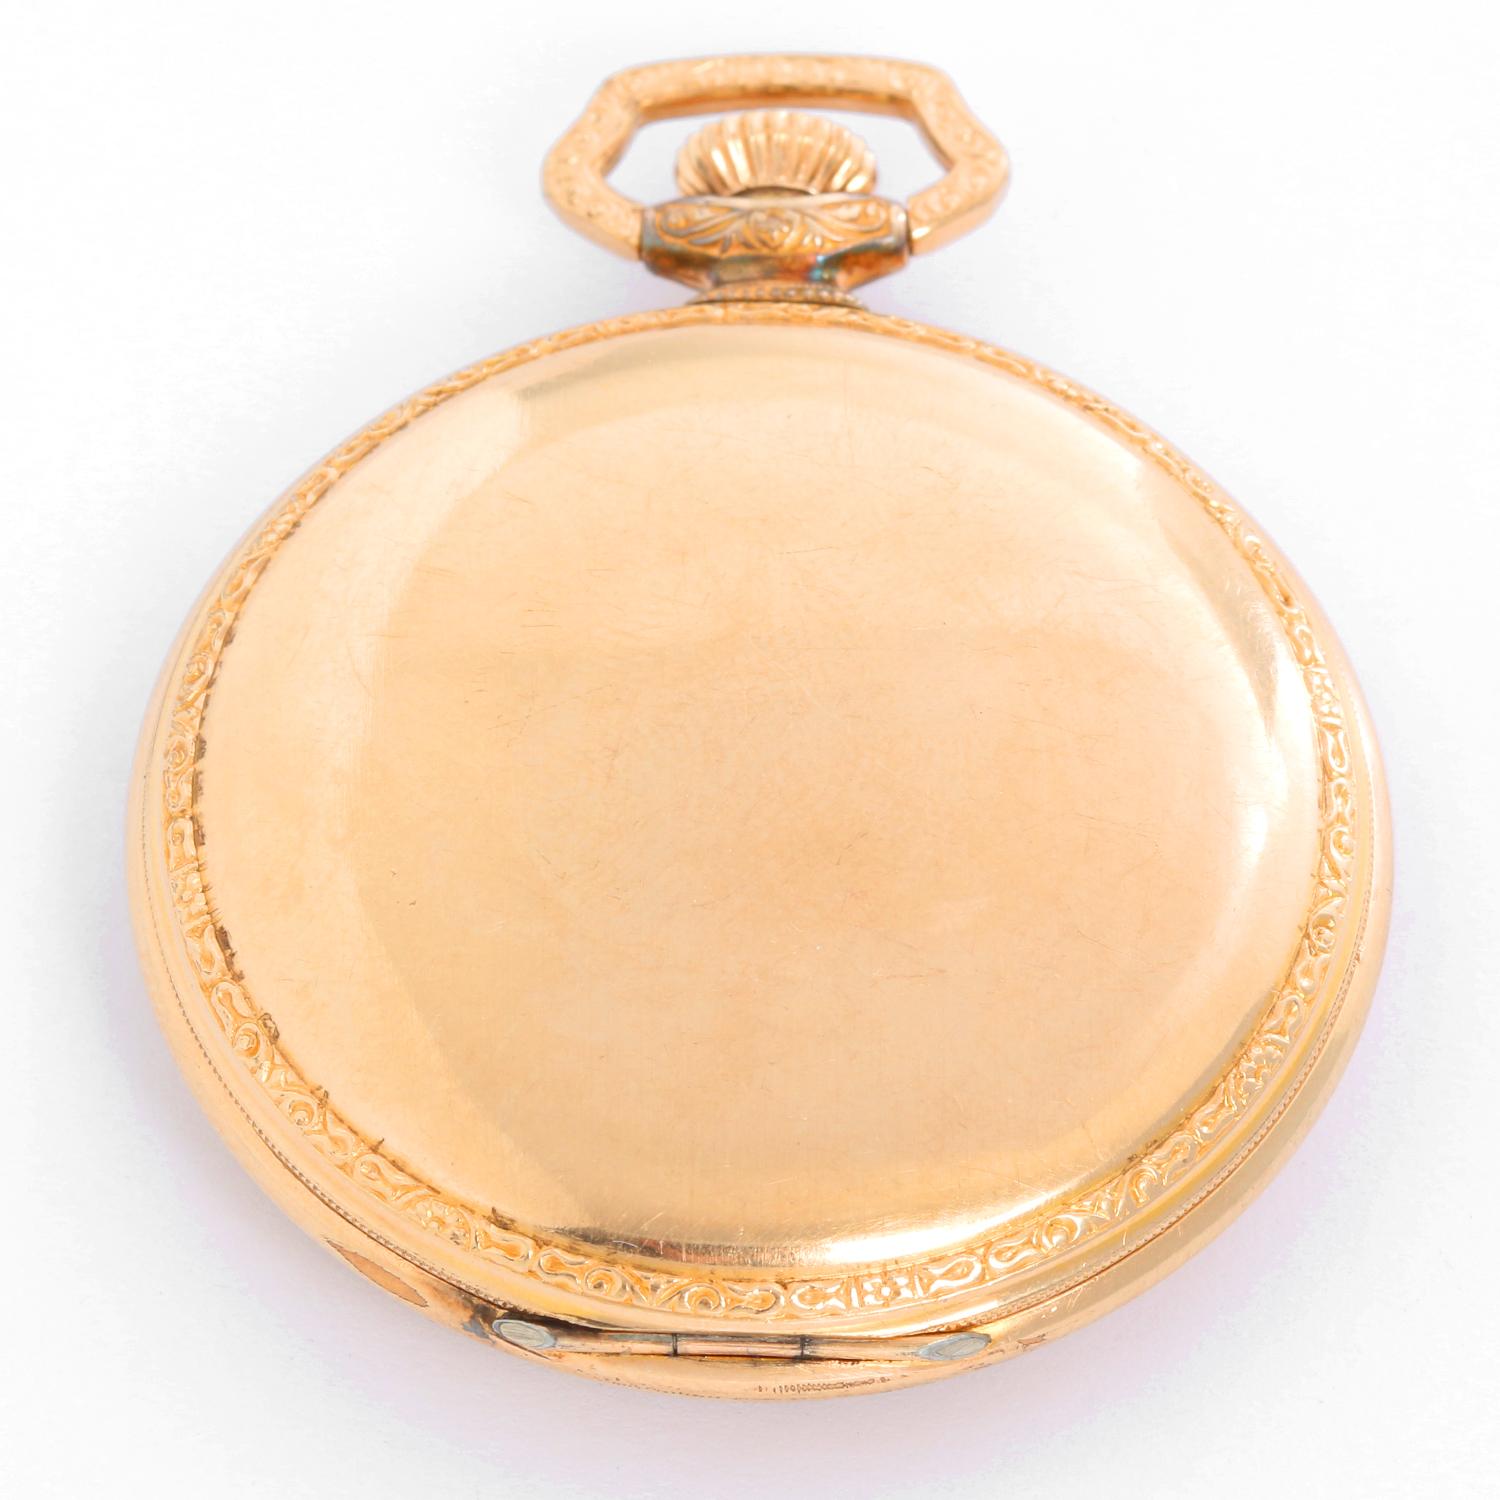 Dudley Gold Filled Masonic Model 3 Pocket Watch - Manual winding. Gold filled ( 45 mm ) with ornate bezel; Display back seeing various bridges made in the shape of the 